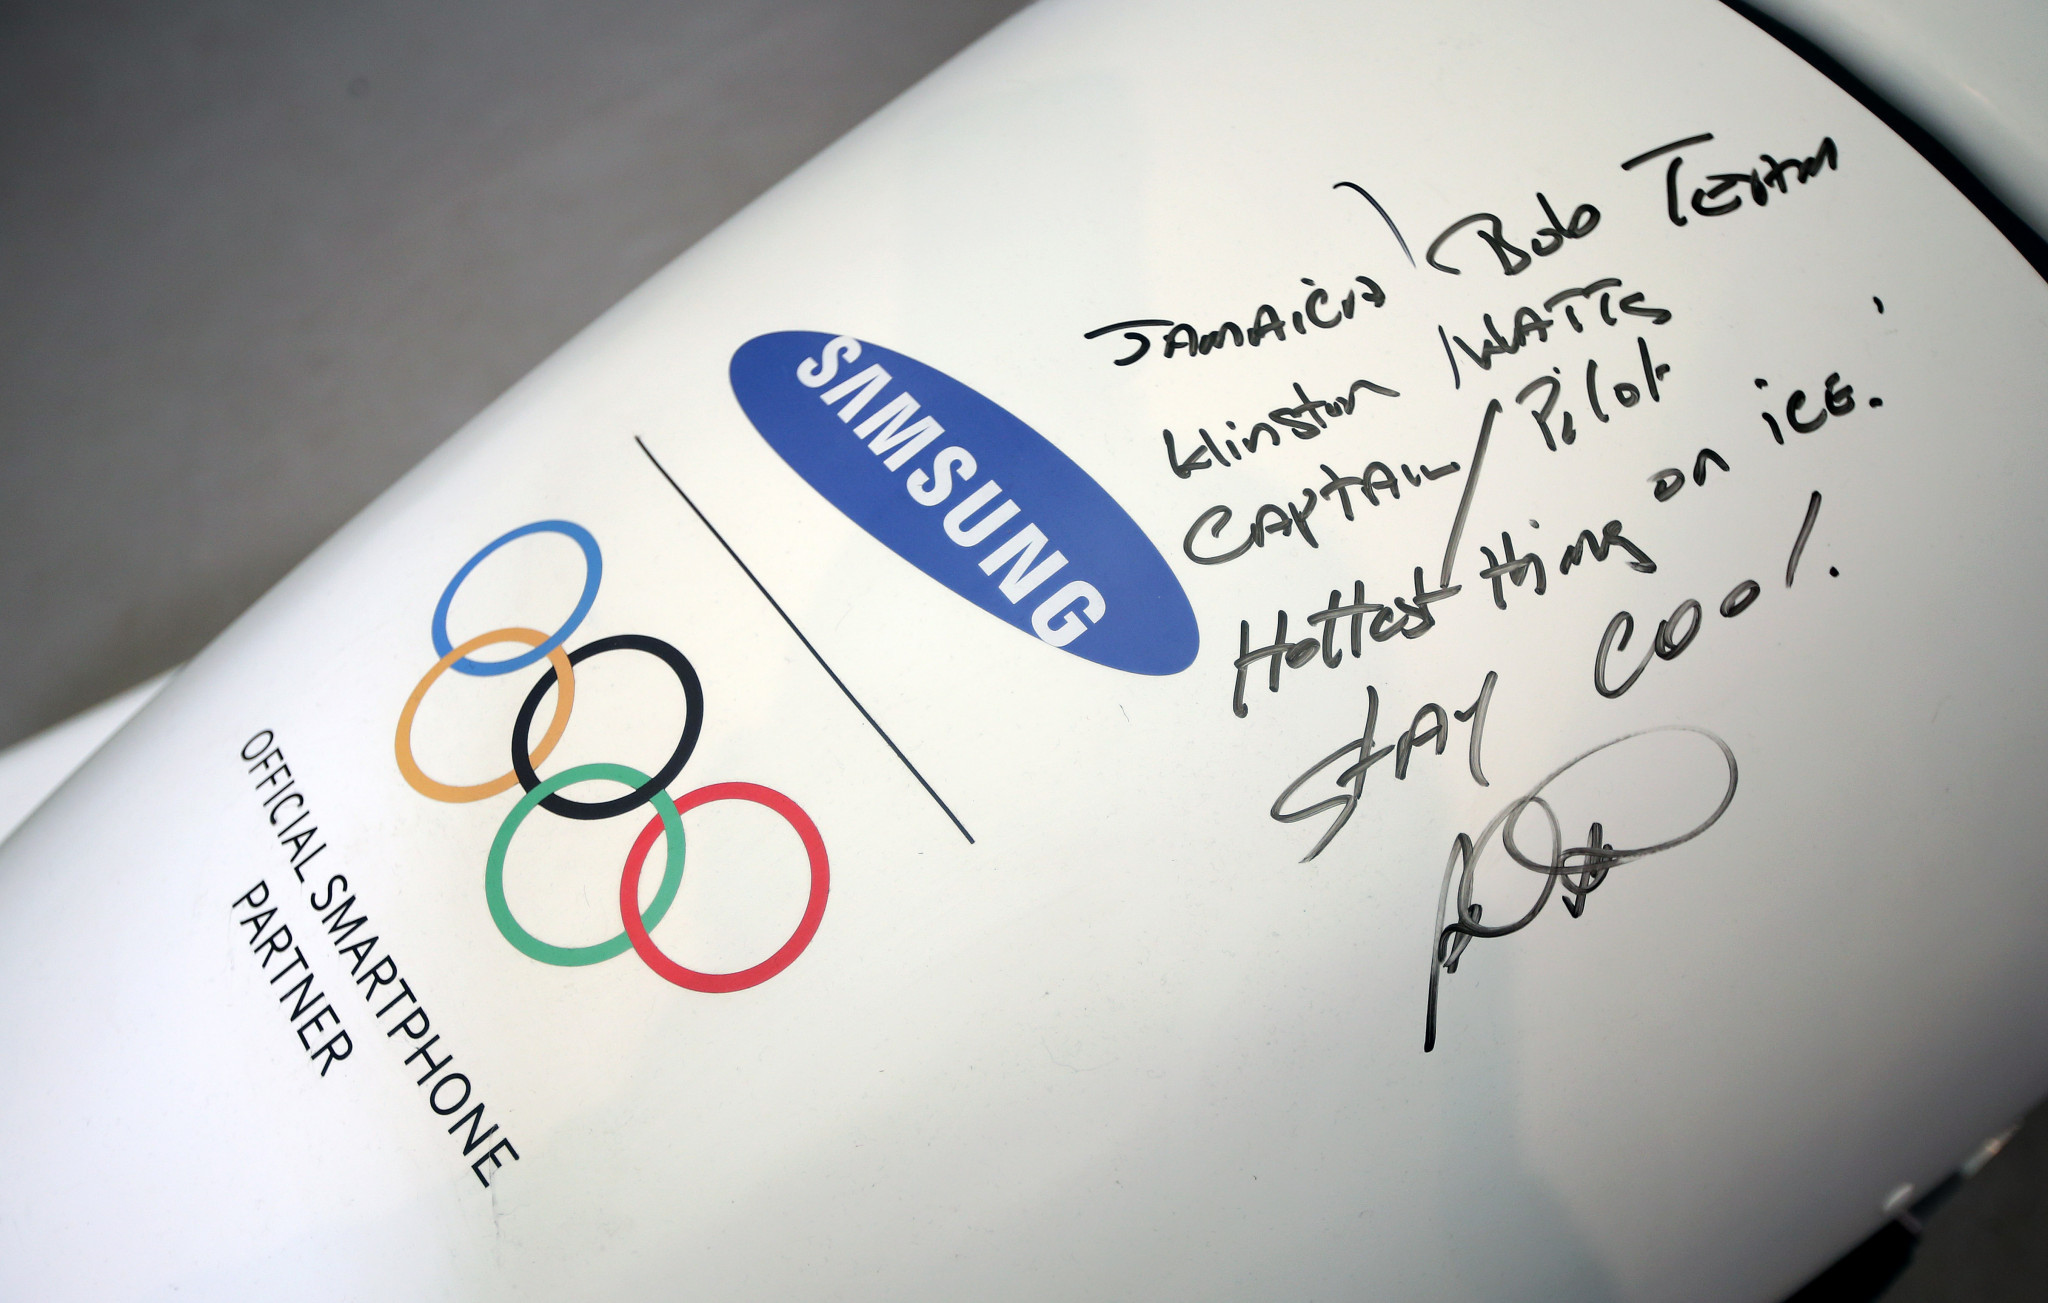 Samsung's current partnership with the IOC will run until 2028 ©Getty Images